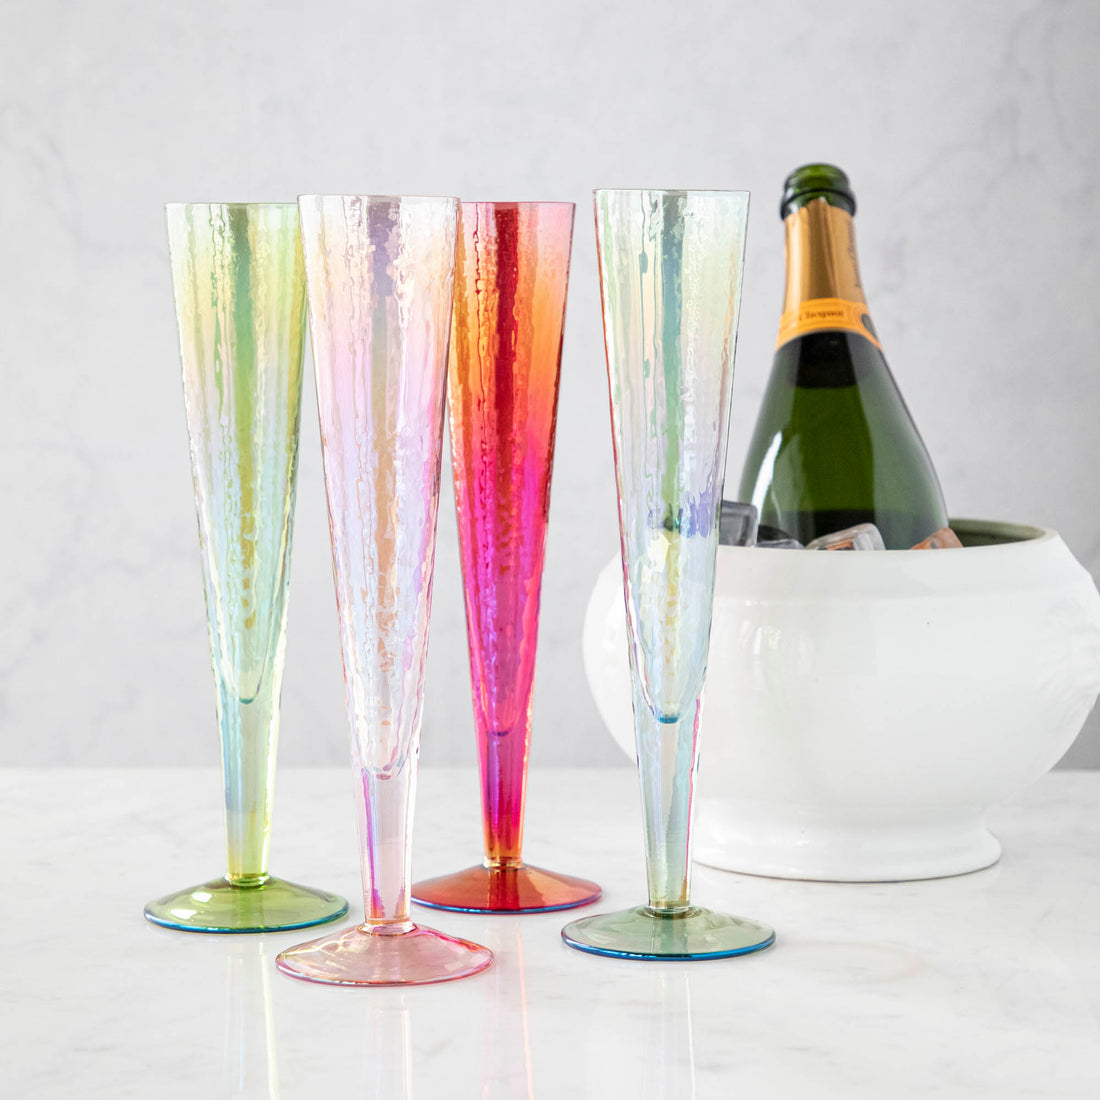 Four Zodax Luster Slim Champagne Flute Glassware with a champagne bottle in an ice bucket in the background.